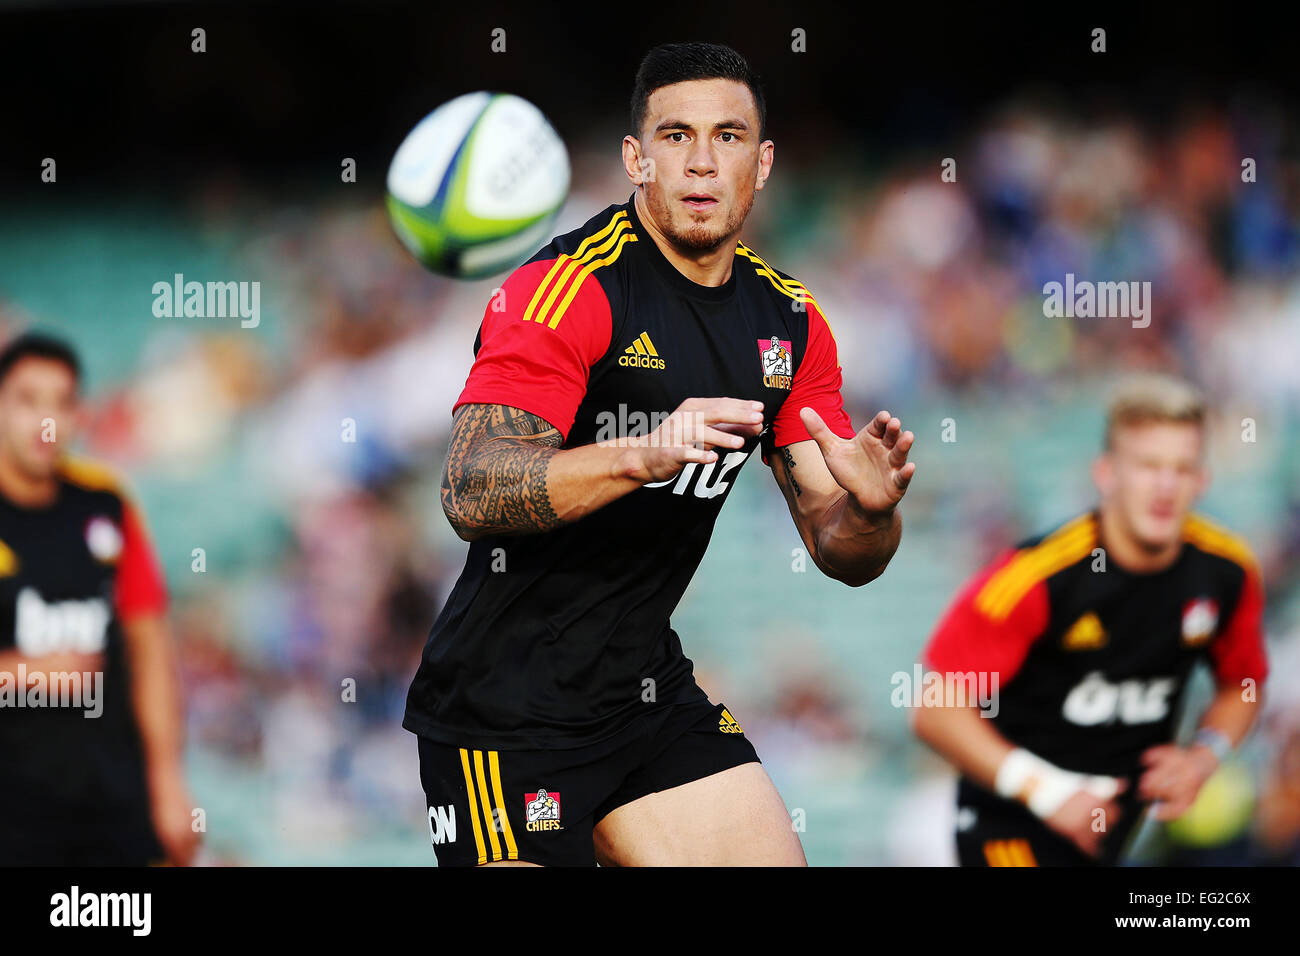 Auckland, New Zealand. 14th Feb, 2015. Sonny Bill Williams of the Chiefs during warm ups. Super Rugby match, Blues (Auckland) versus Chiefs (Hamilton) at QBE Stadium, Auckland, New Zealand. Saturday 14 February 2015. The Chiefs ran out winners by 18-23 in a close derby. © Action Plus Sports/Alamy Live News Stock Photo